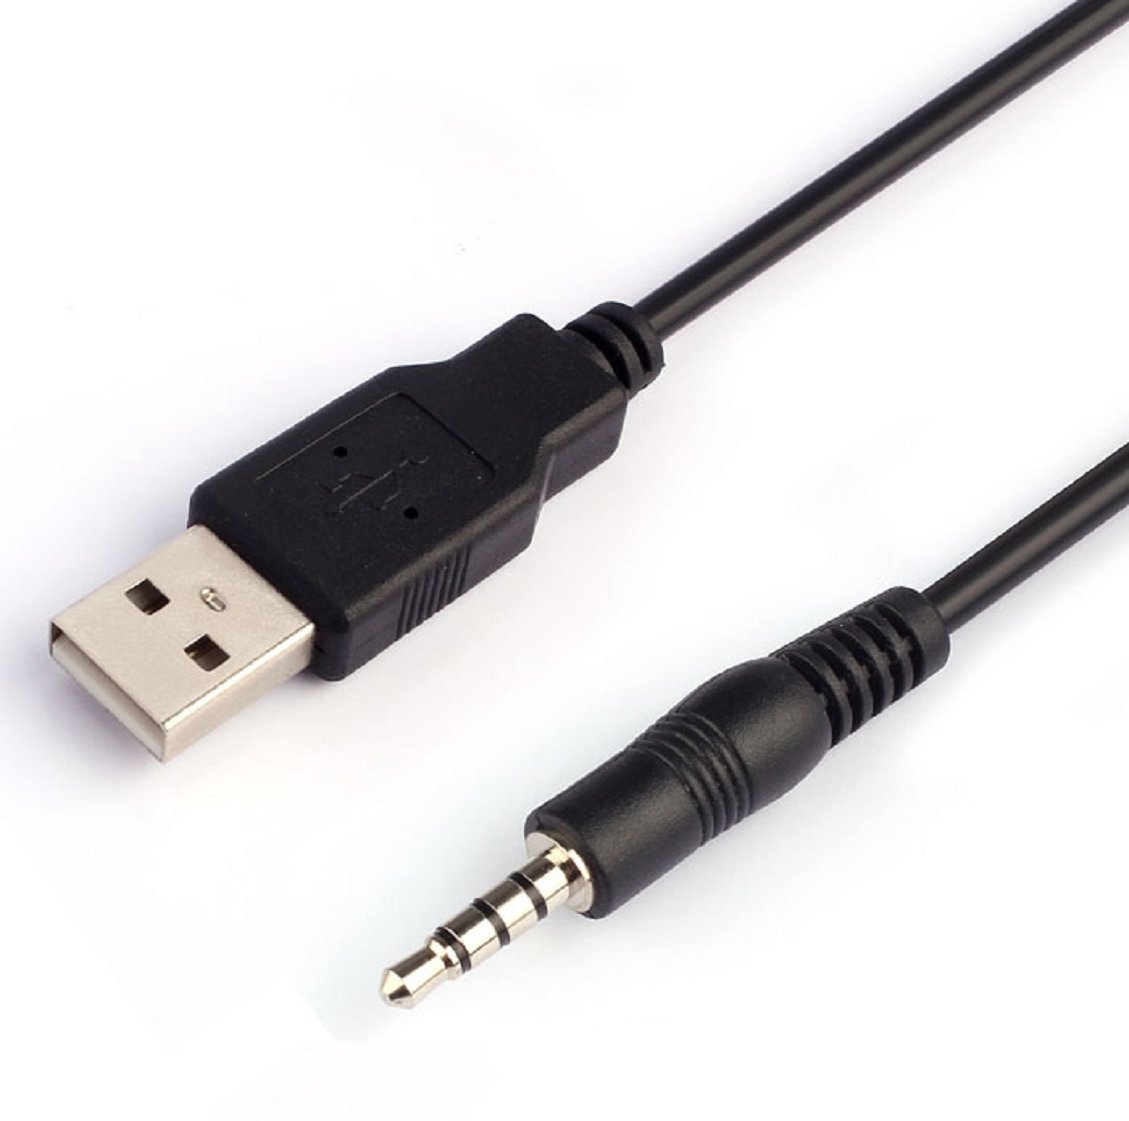 Stream Mp3 Player Usb Charging Cable H2o Audio